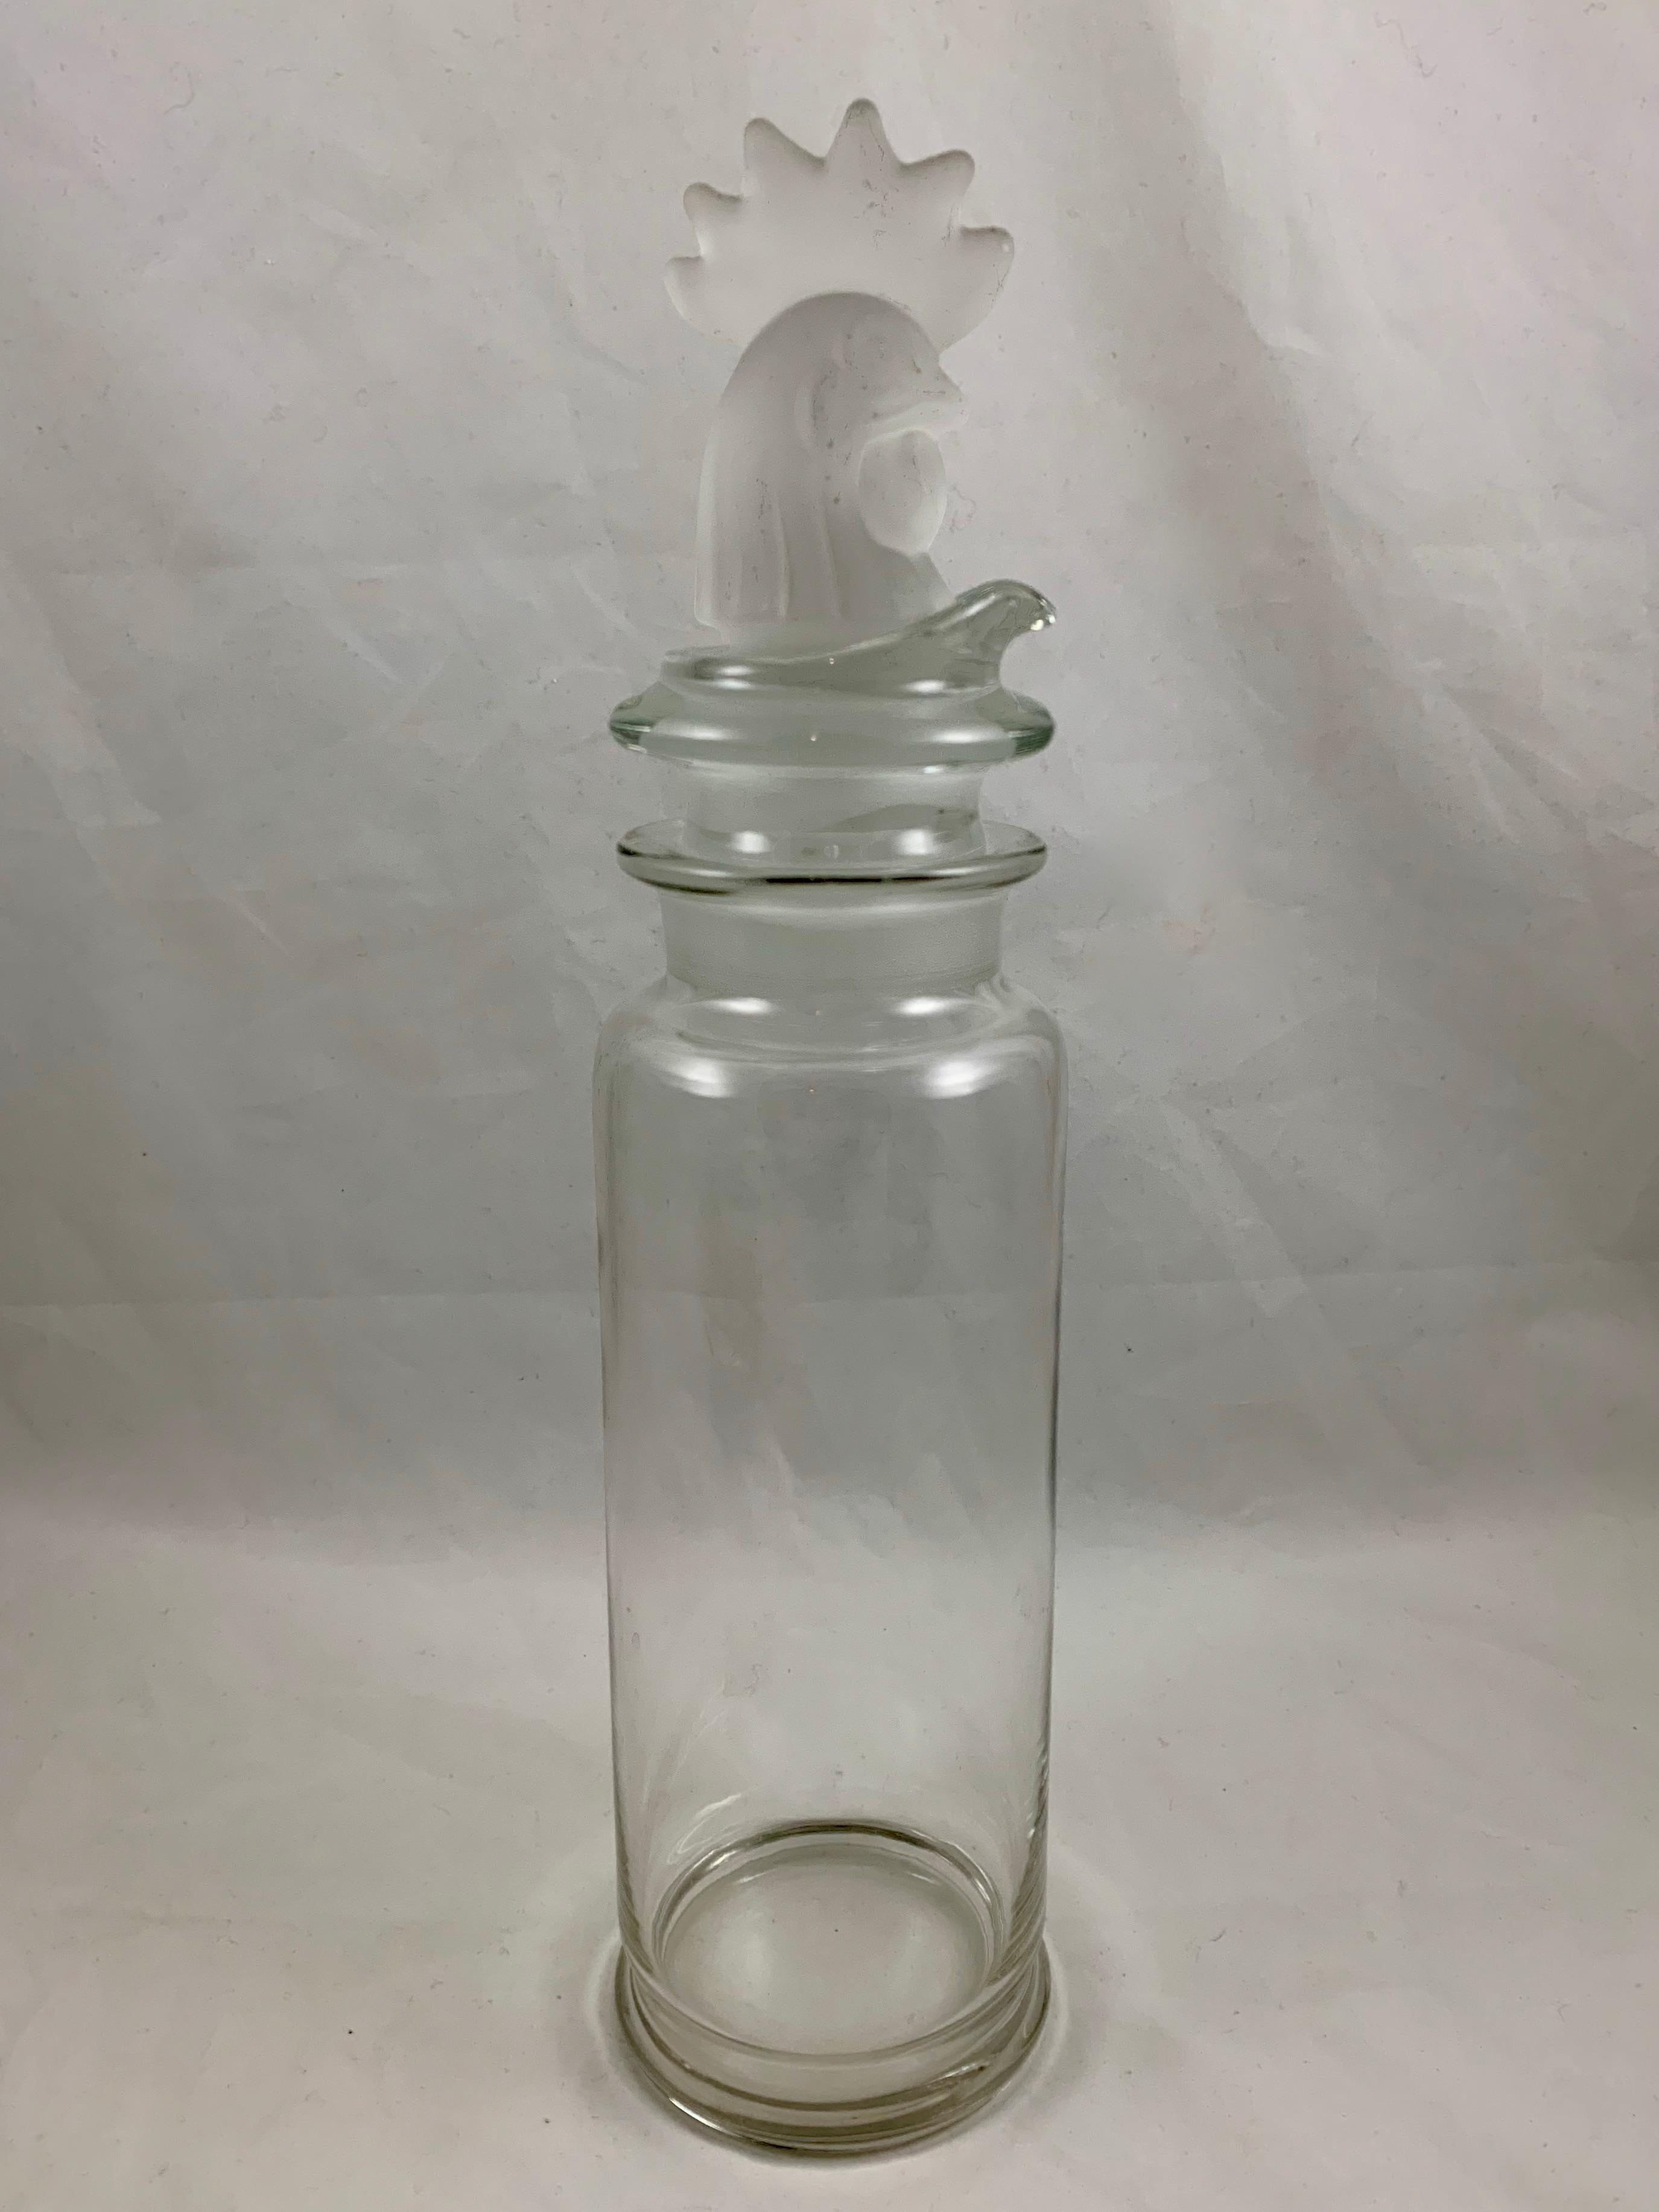 An Art Deco period, Heisey glass, tall three-piece cocktail shaker with a frosted Rooster head stopper, circa early 20th century. 

The neck of the shaker holds an inset pourer formed with a strainer which then holds the stopper. All three pieces